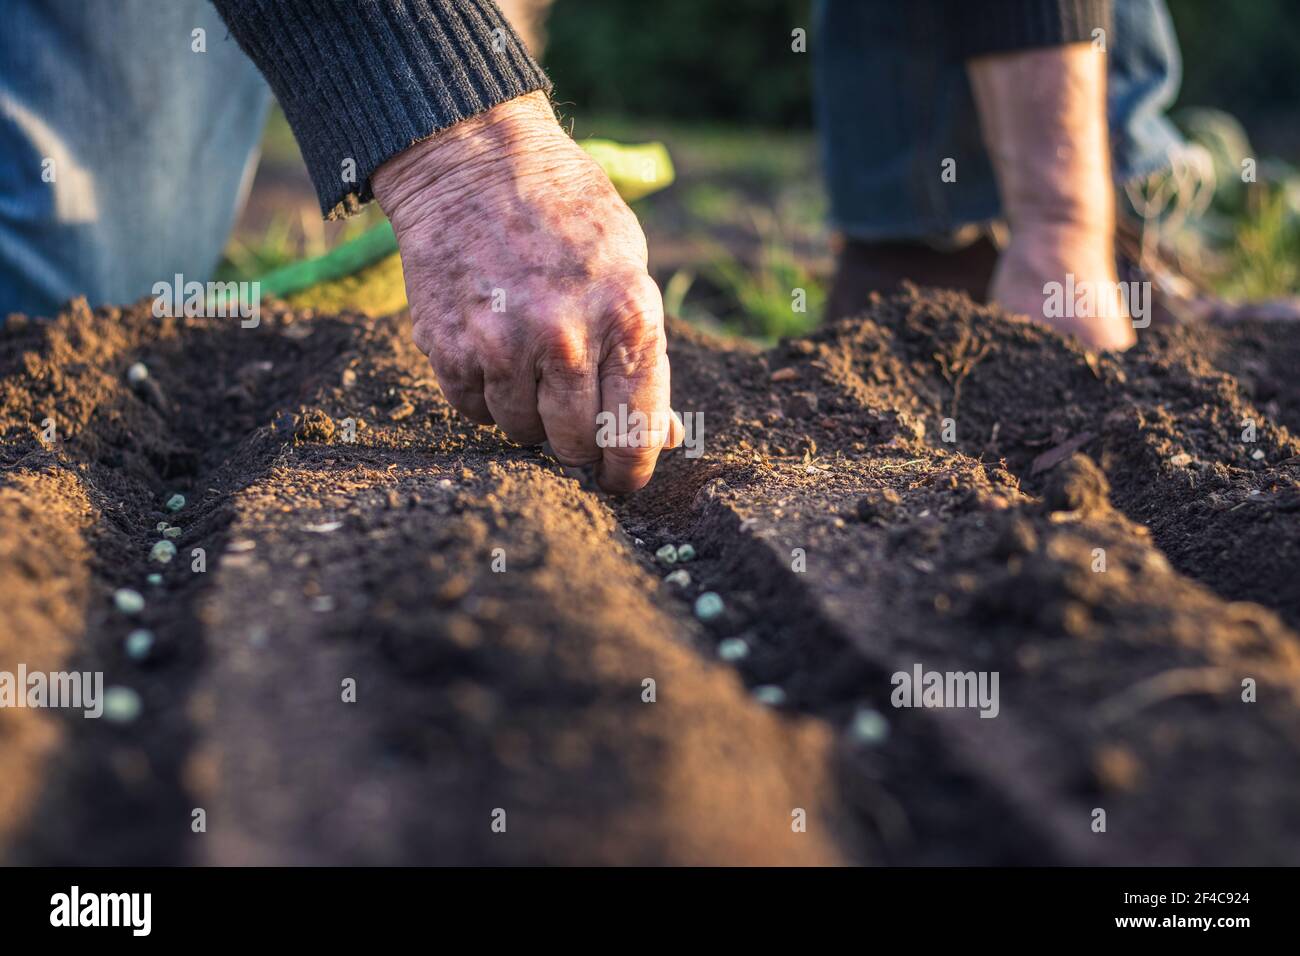 Senior farmer sowing seeds in garden. Cultivated plantation at spring. Planting green peas in soil Stock Photo